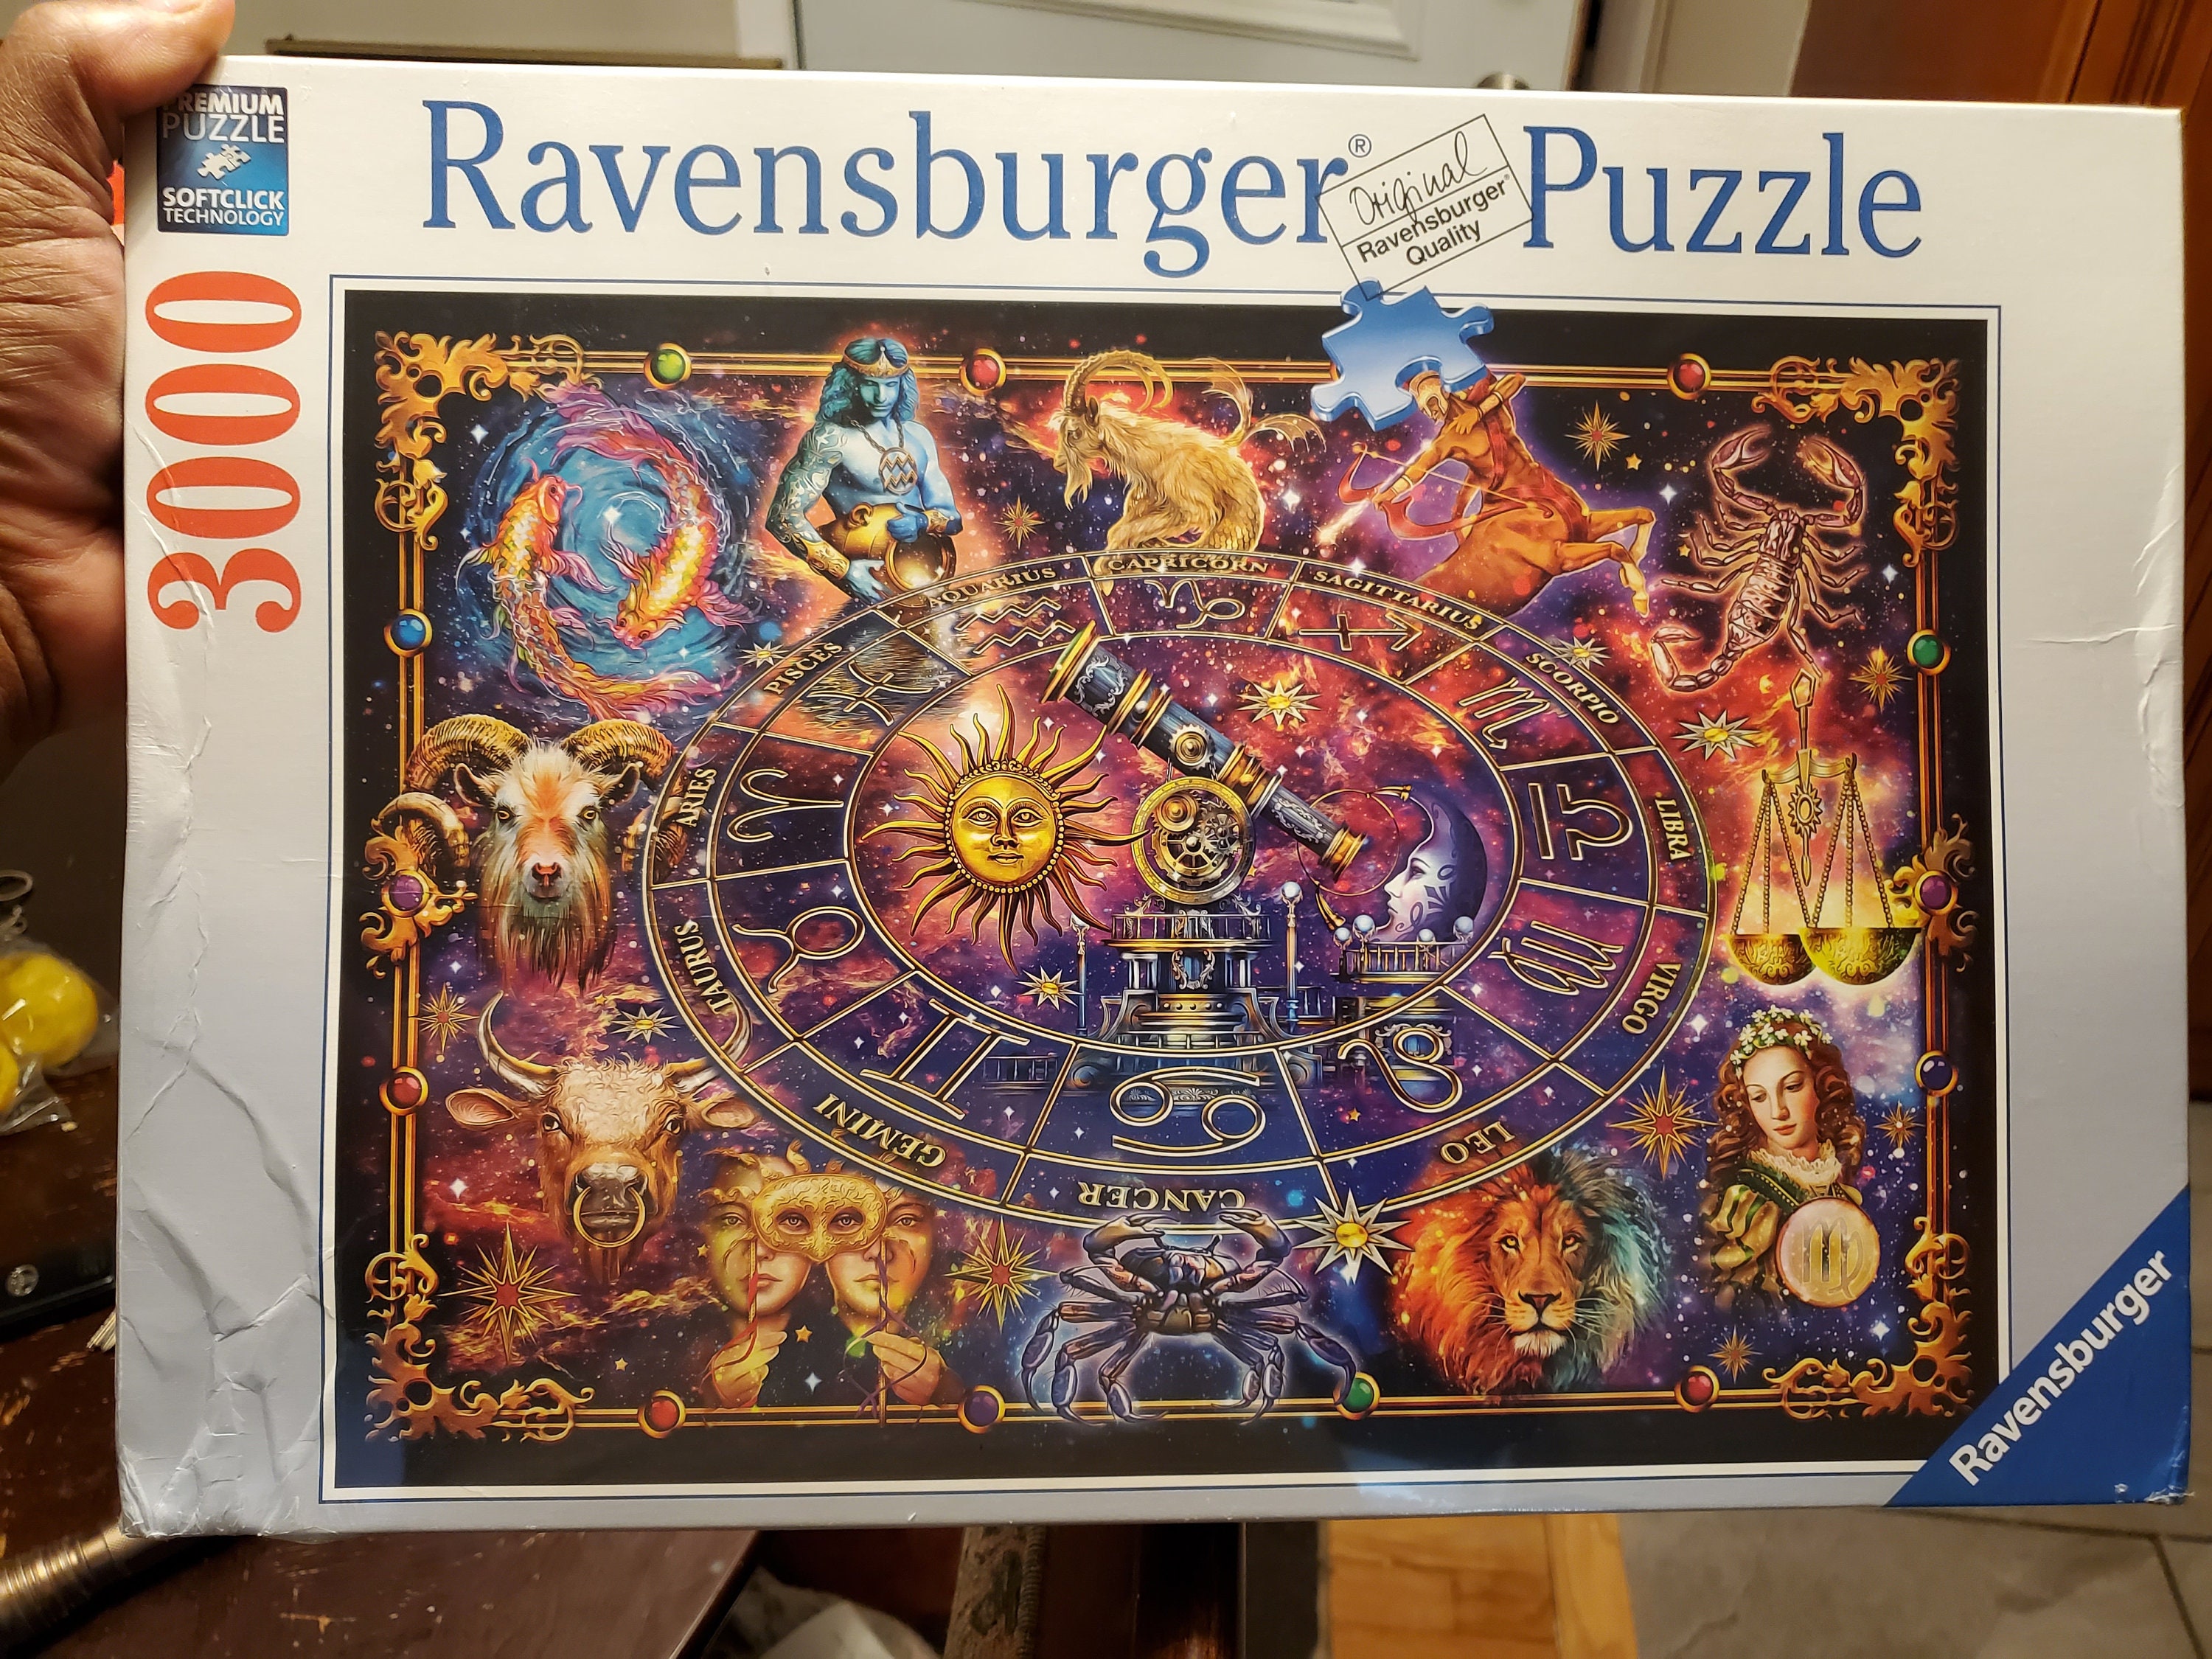 ZODIAC 3000 PIECE PUZZLE - THE TOY STORE